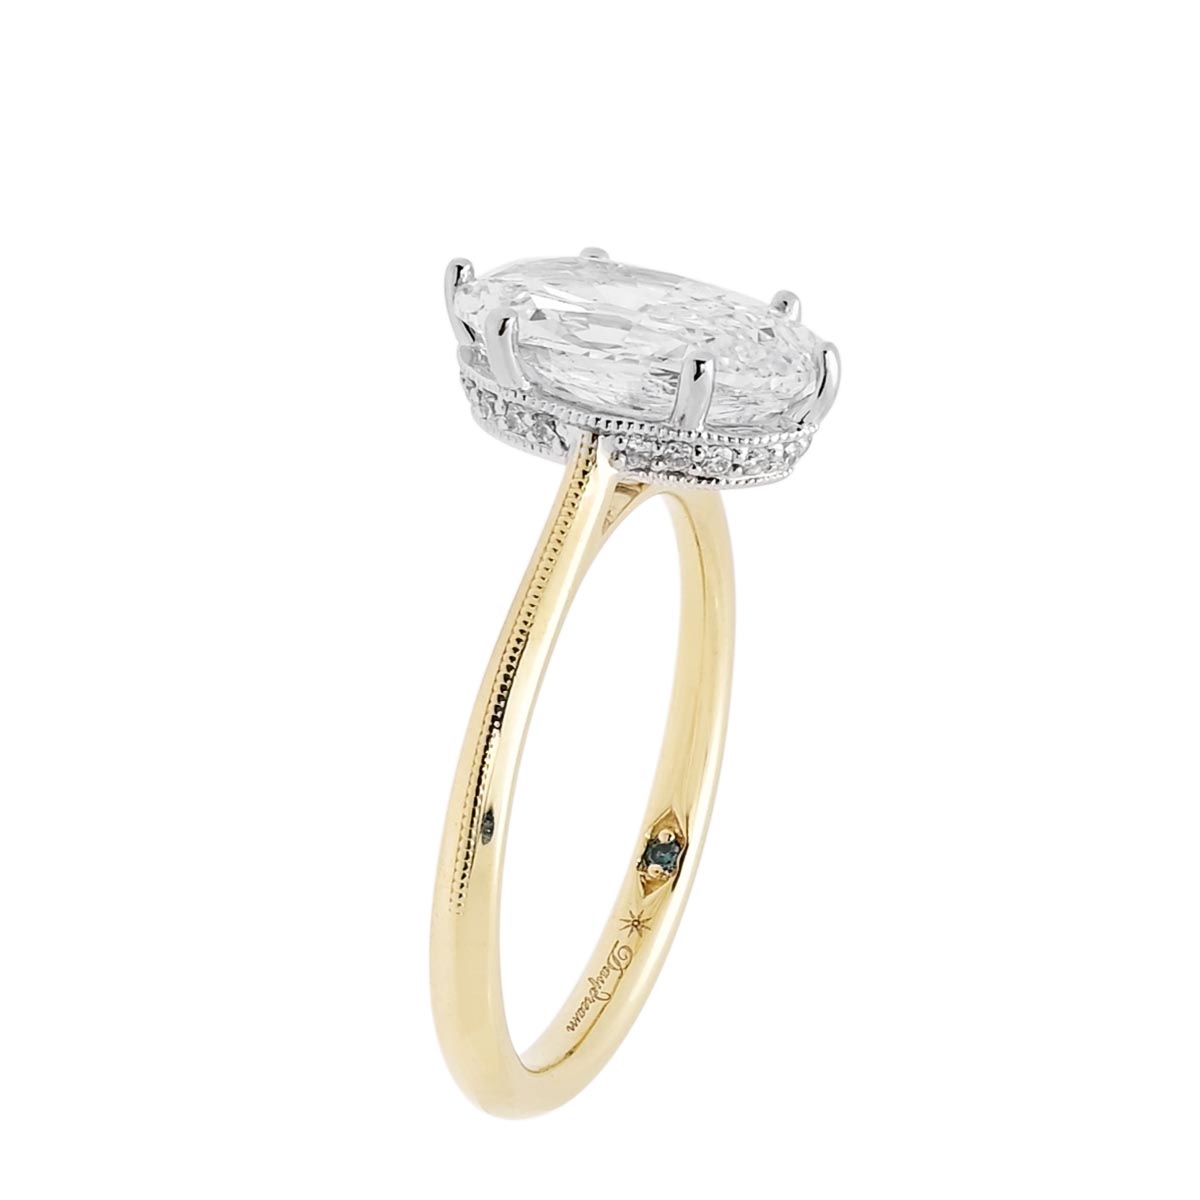 Oval Diamond Engagement Ring with Hidden Halo in 14kt Yellow and White Gold (2 3/8ct tw)